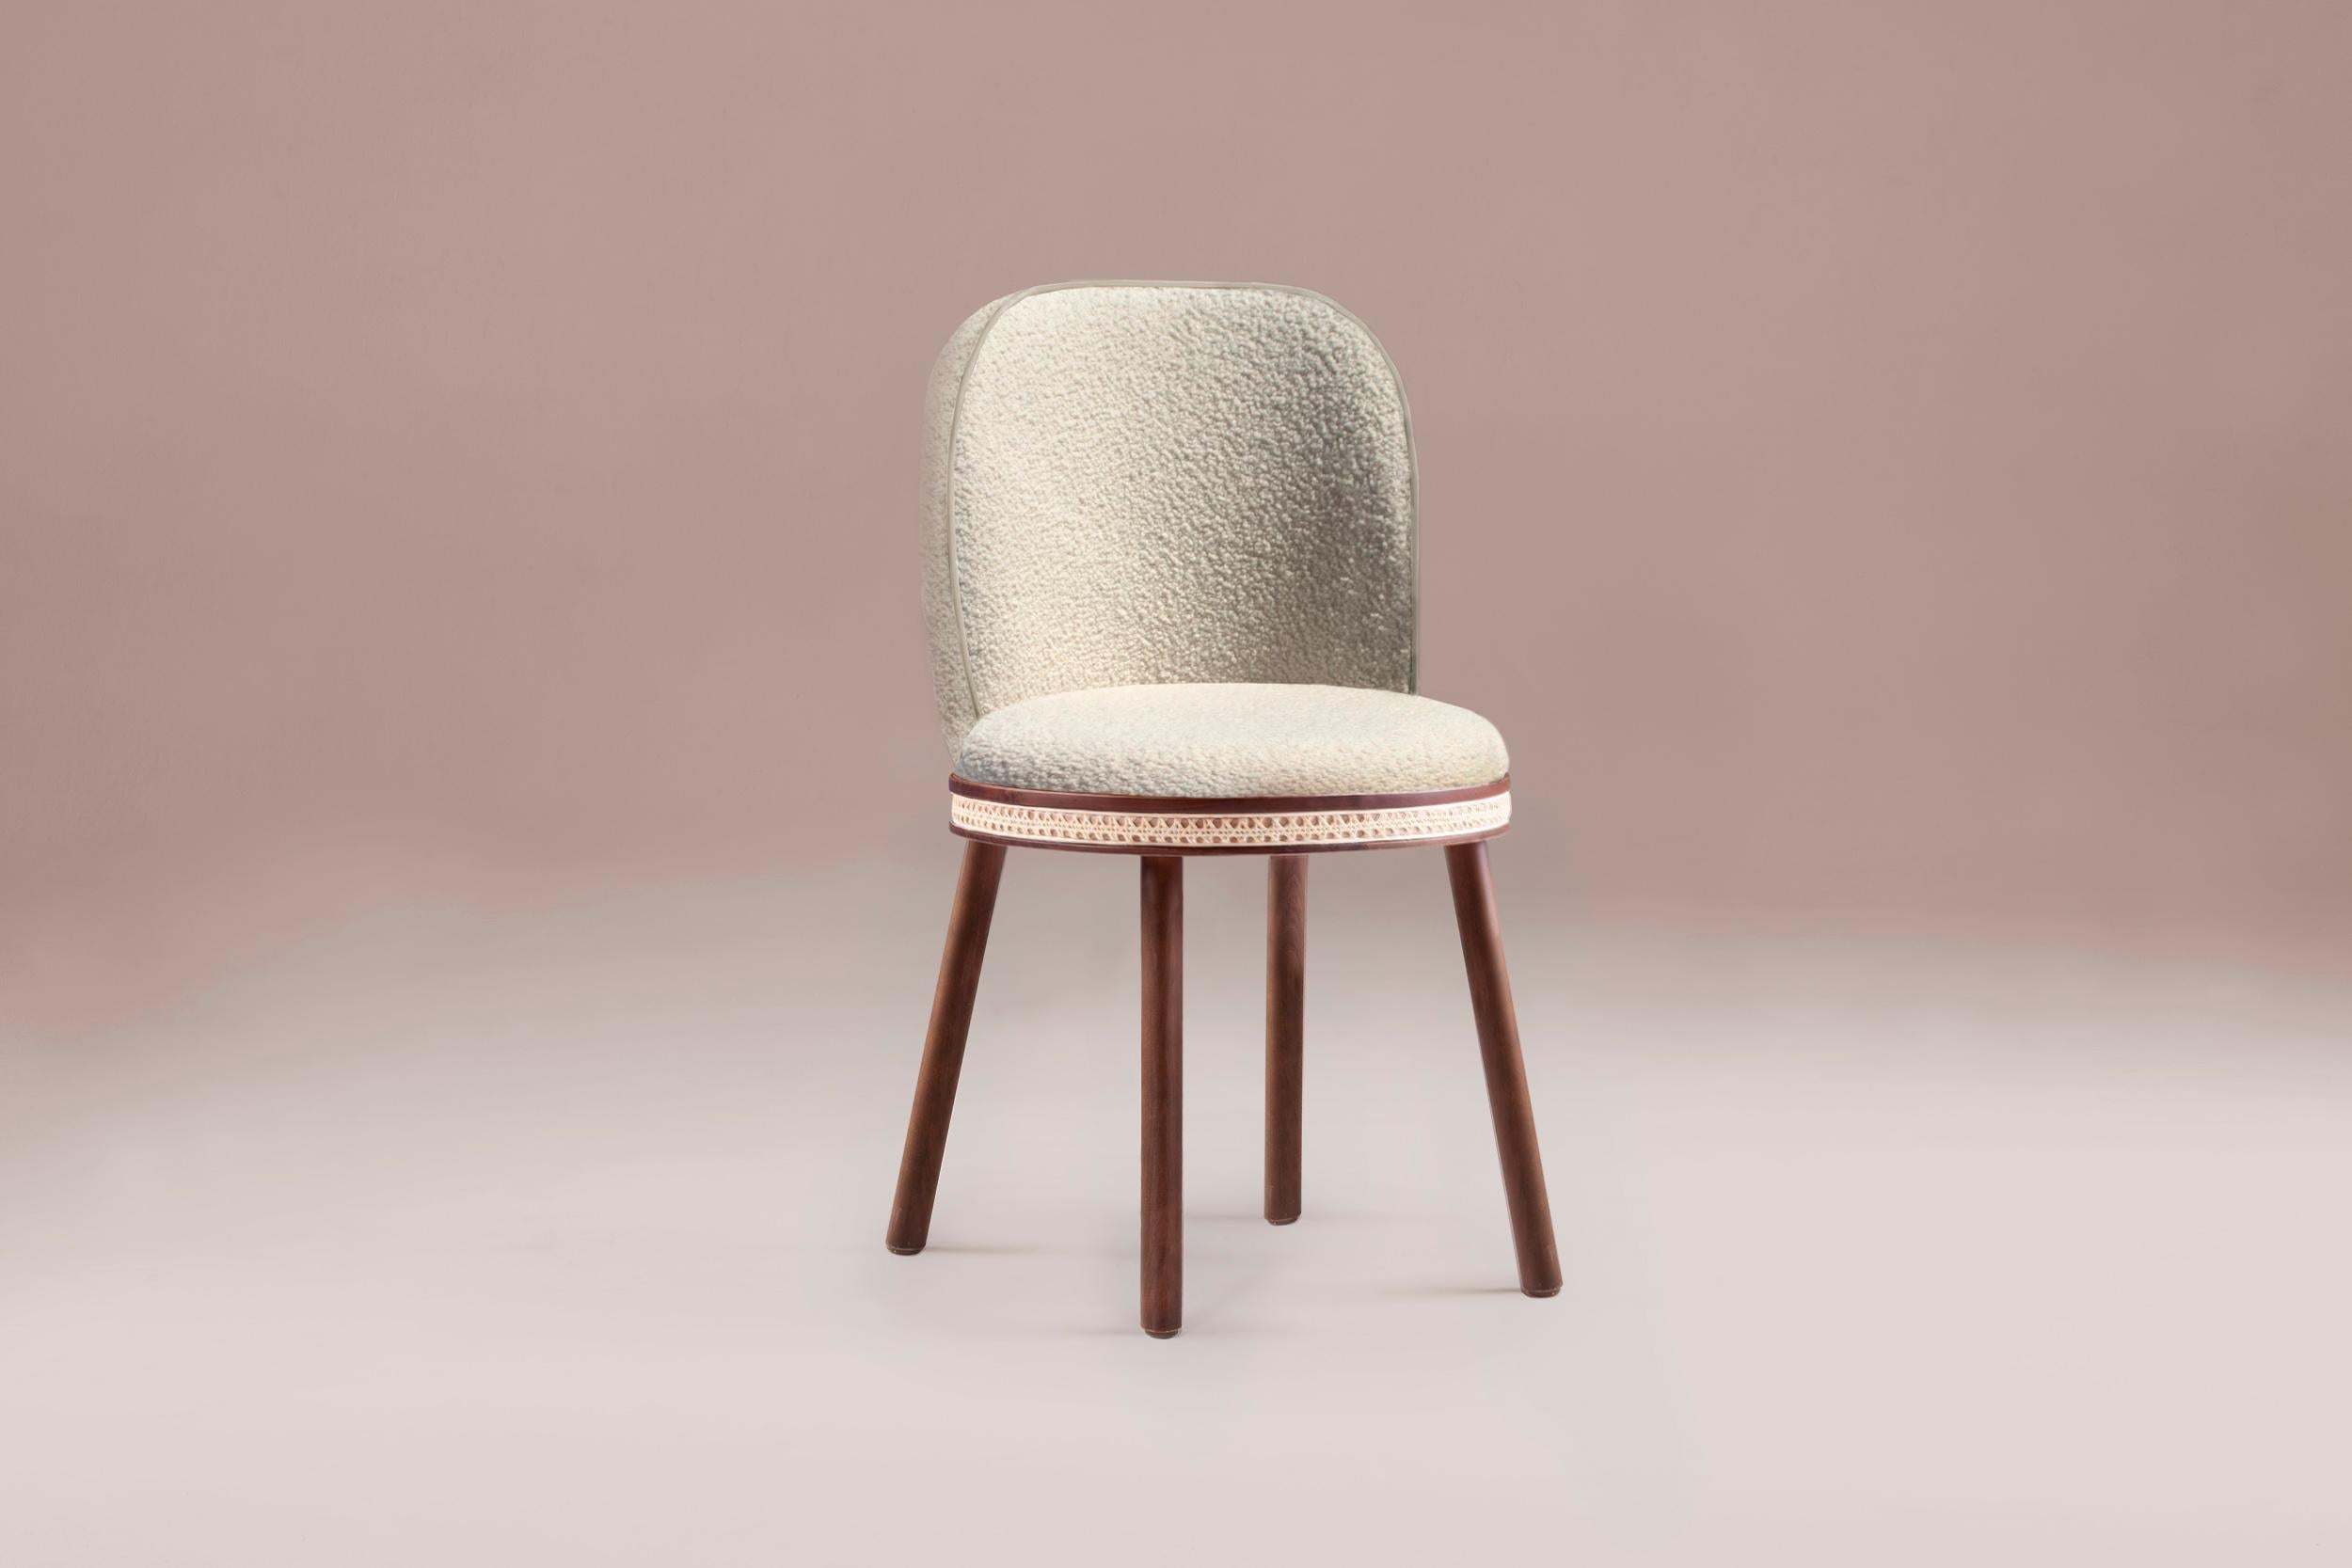 DOOQ Mid-Century Modern Dinning Chair Alma with White Boucle, Walnut Wood Legs

In a piece that combines classic and modern aesthetics we can find a certain harmonic gracefulness paired with an intimate voluptuousness that can embrace you and